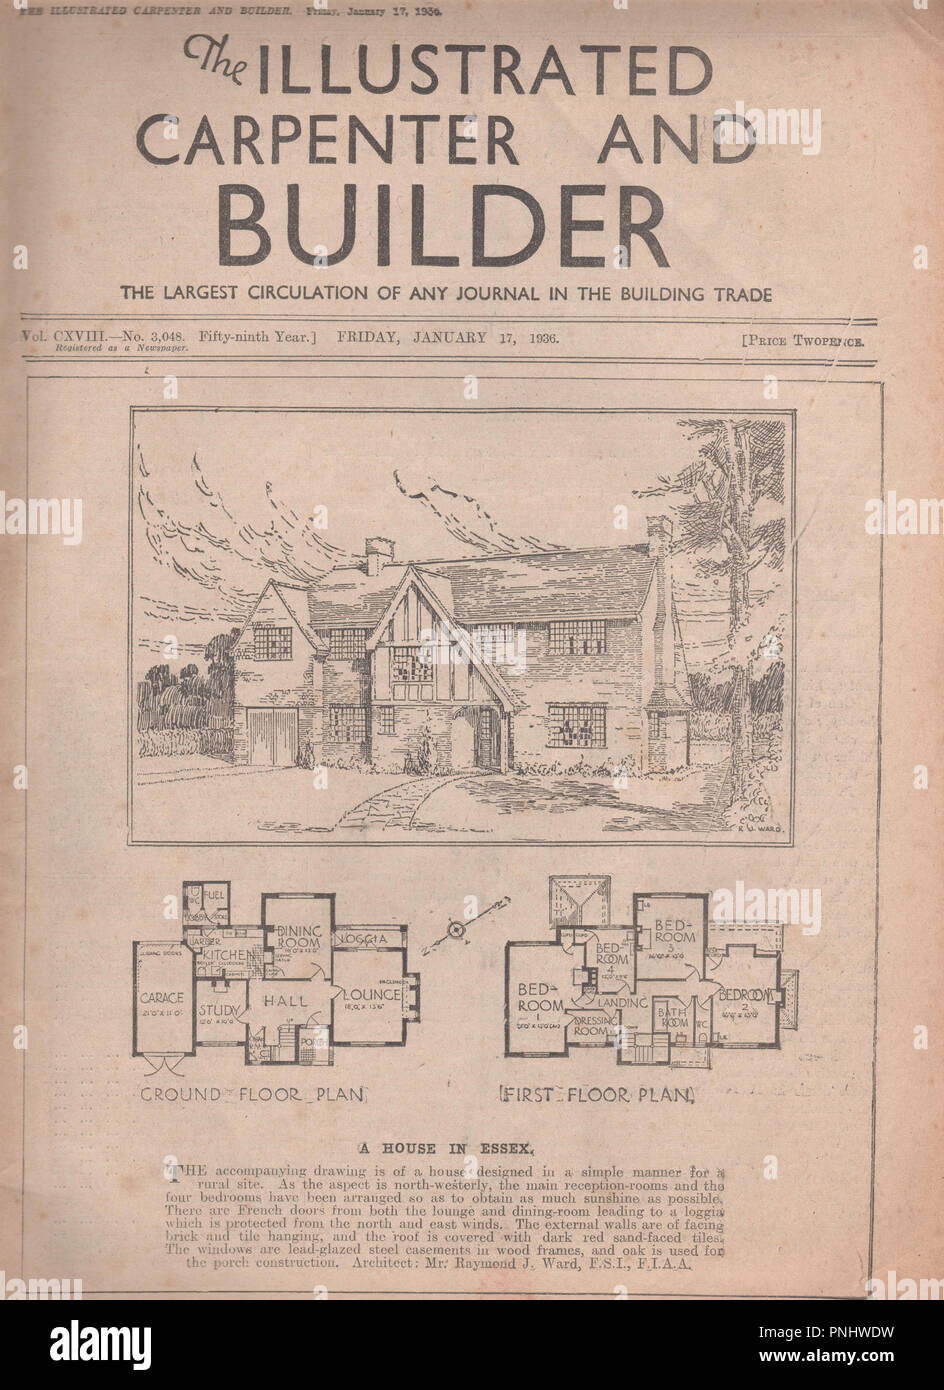 Vintage the Illustrated Carpenter and Builder magazine dated January 17th 1936 a popular weekly building trade magazine first published in 1877 and ran to 1971.  The illustration shows a mock tudor home in Essex from the mid 1930s together with floor plans by architect Raymond J. Ward Stock Photo